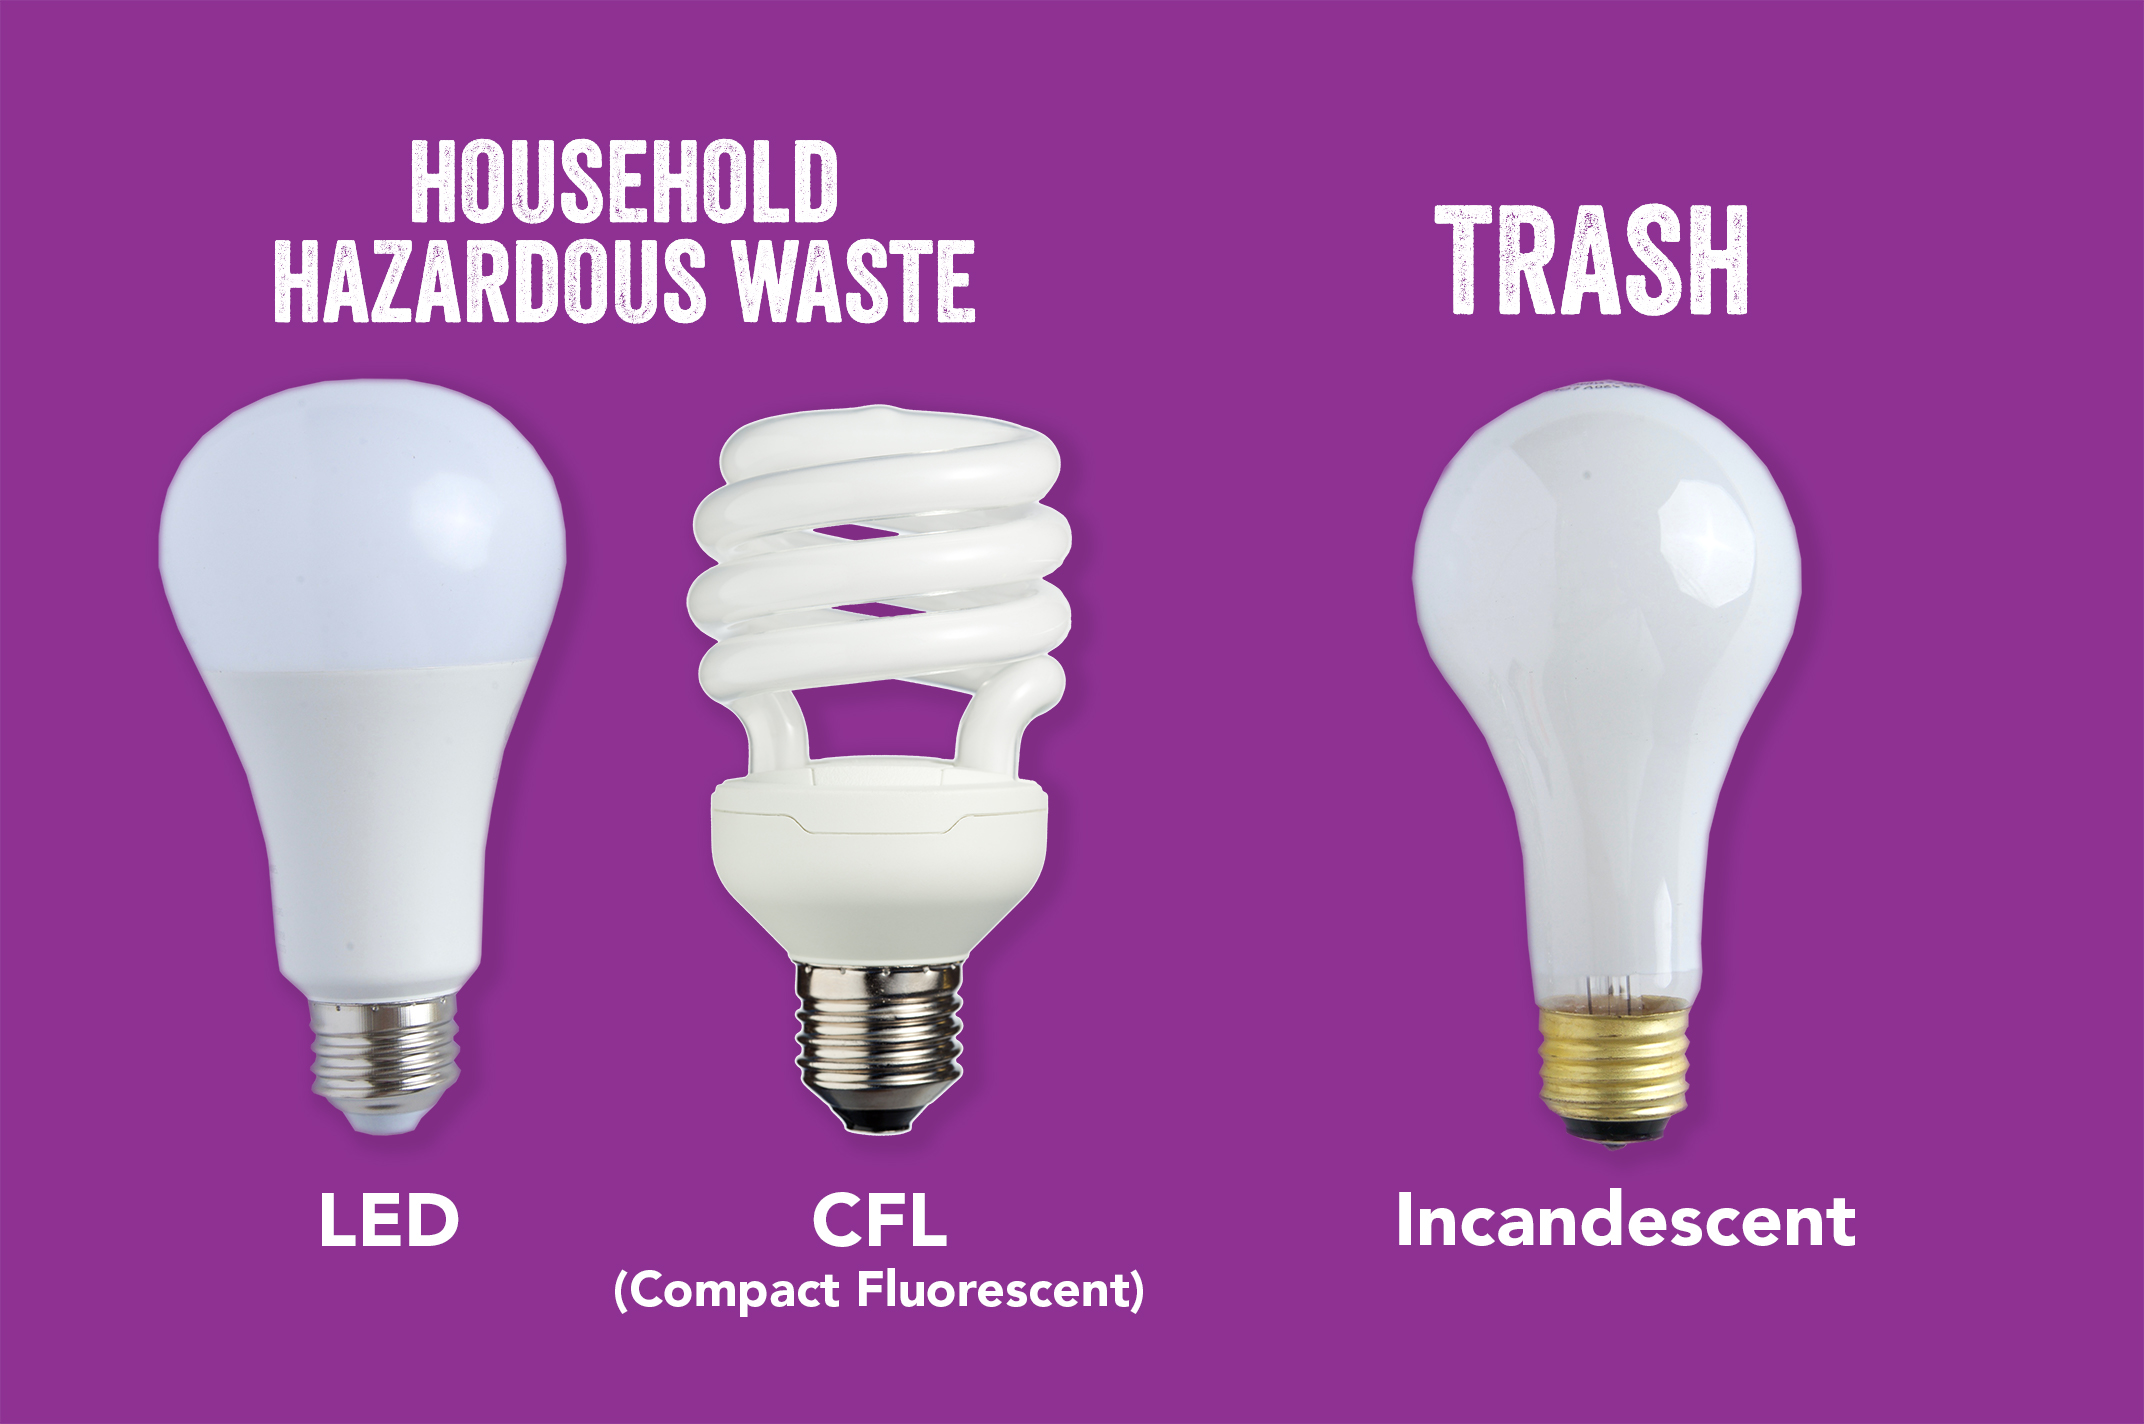 How to dispose of or recycle Light Bulbs - LED - Blue Earth County